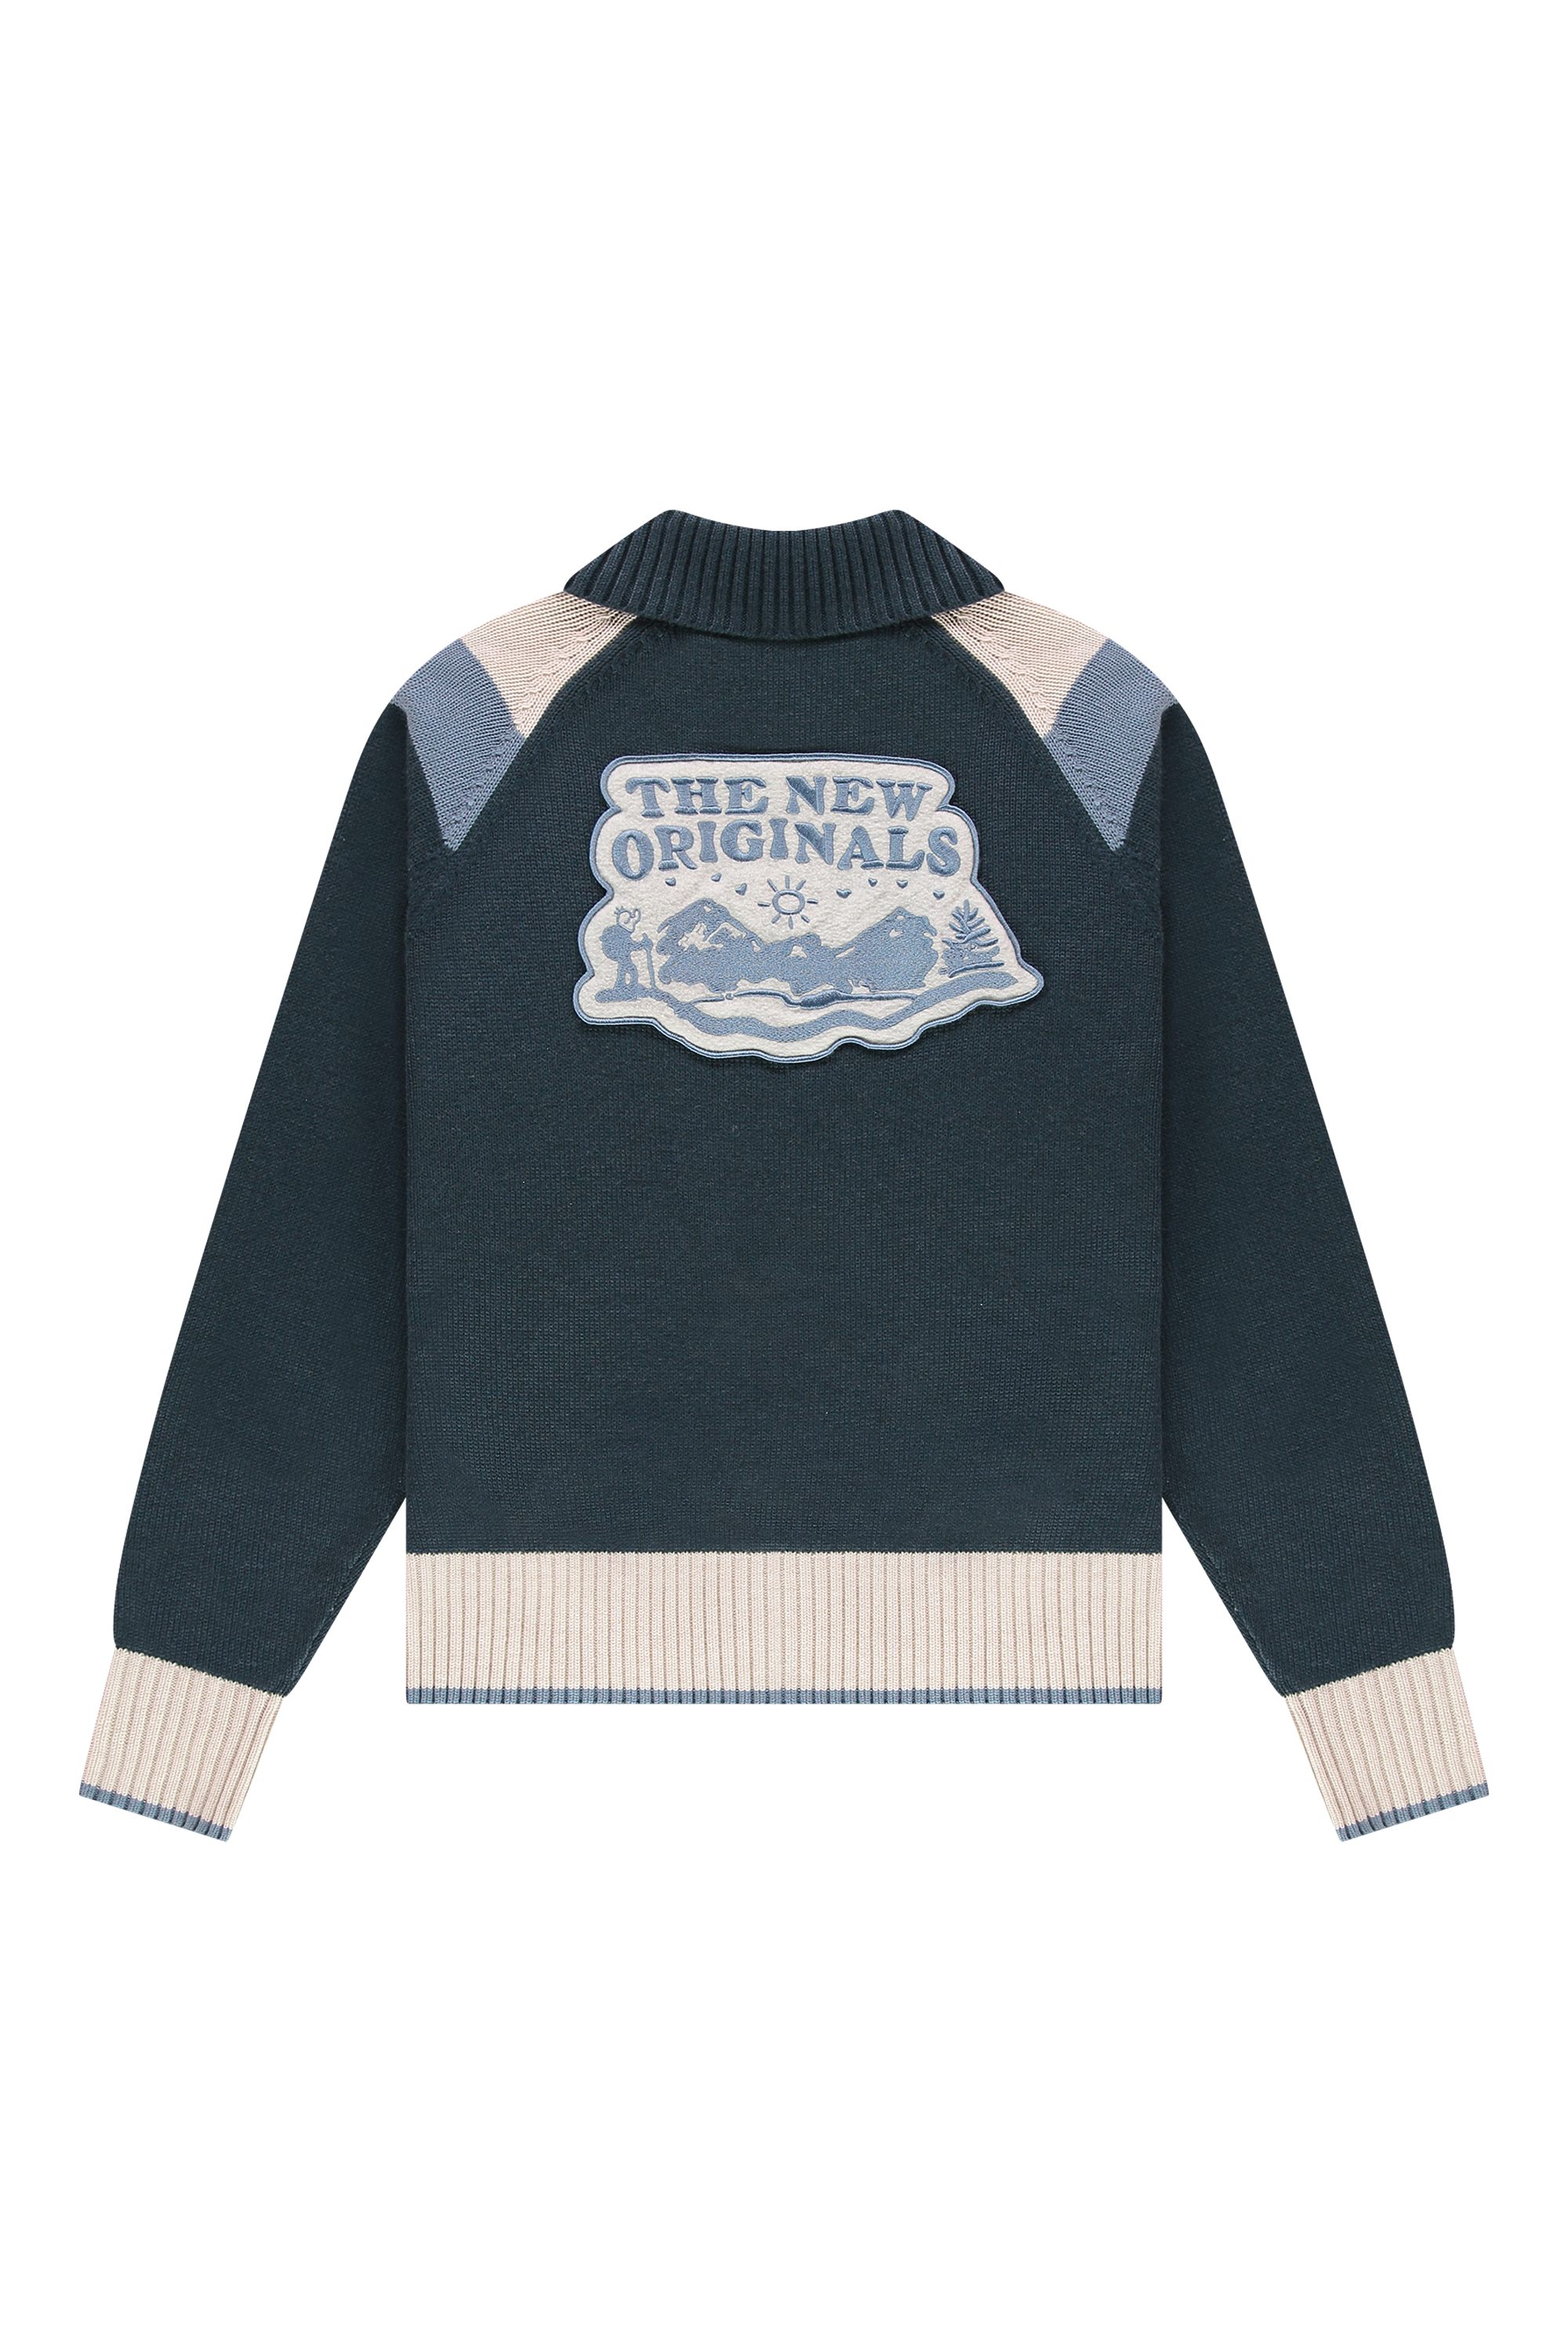 Scout Camp Varsity Zip Up Magical Forest